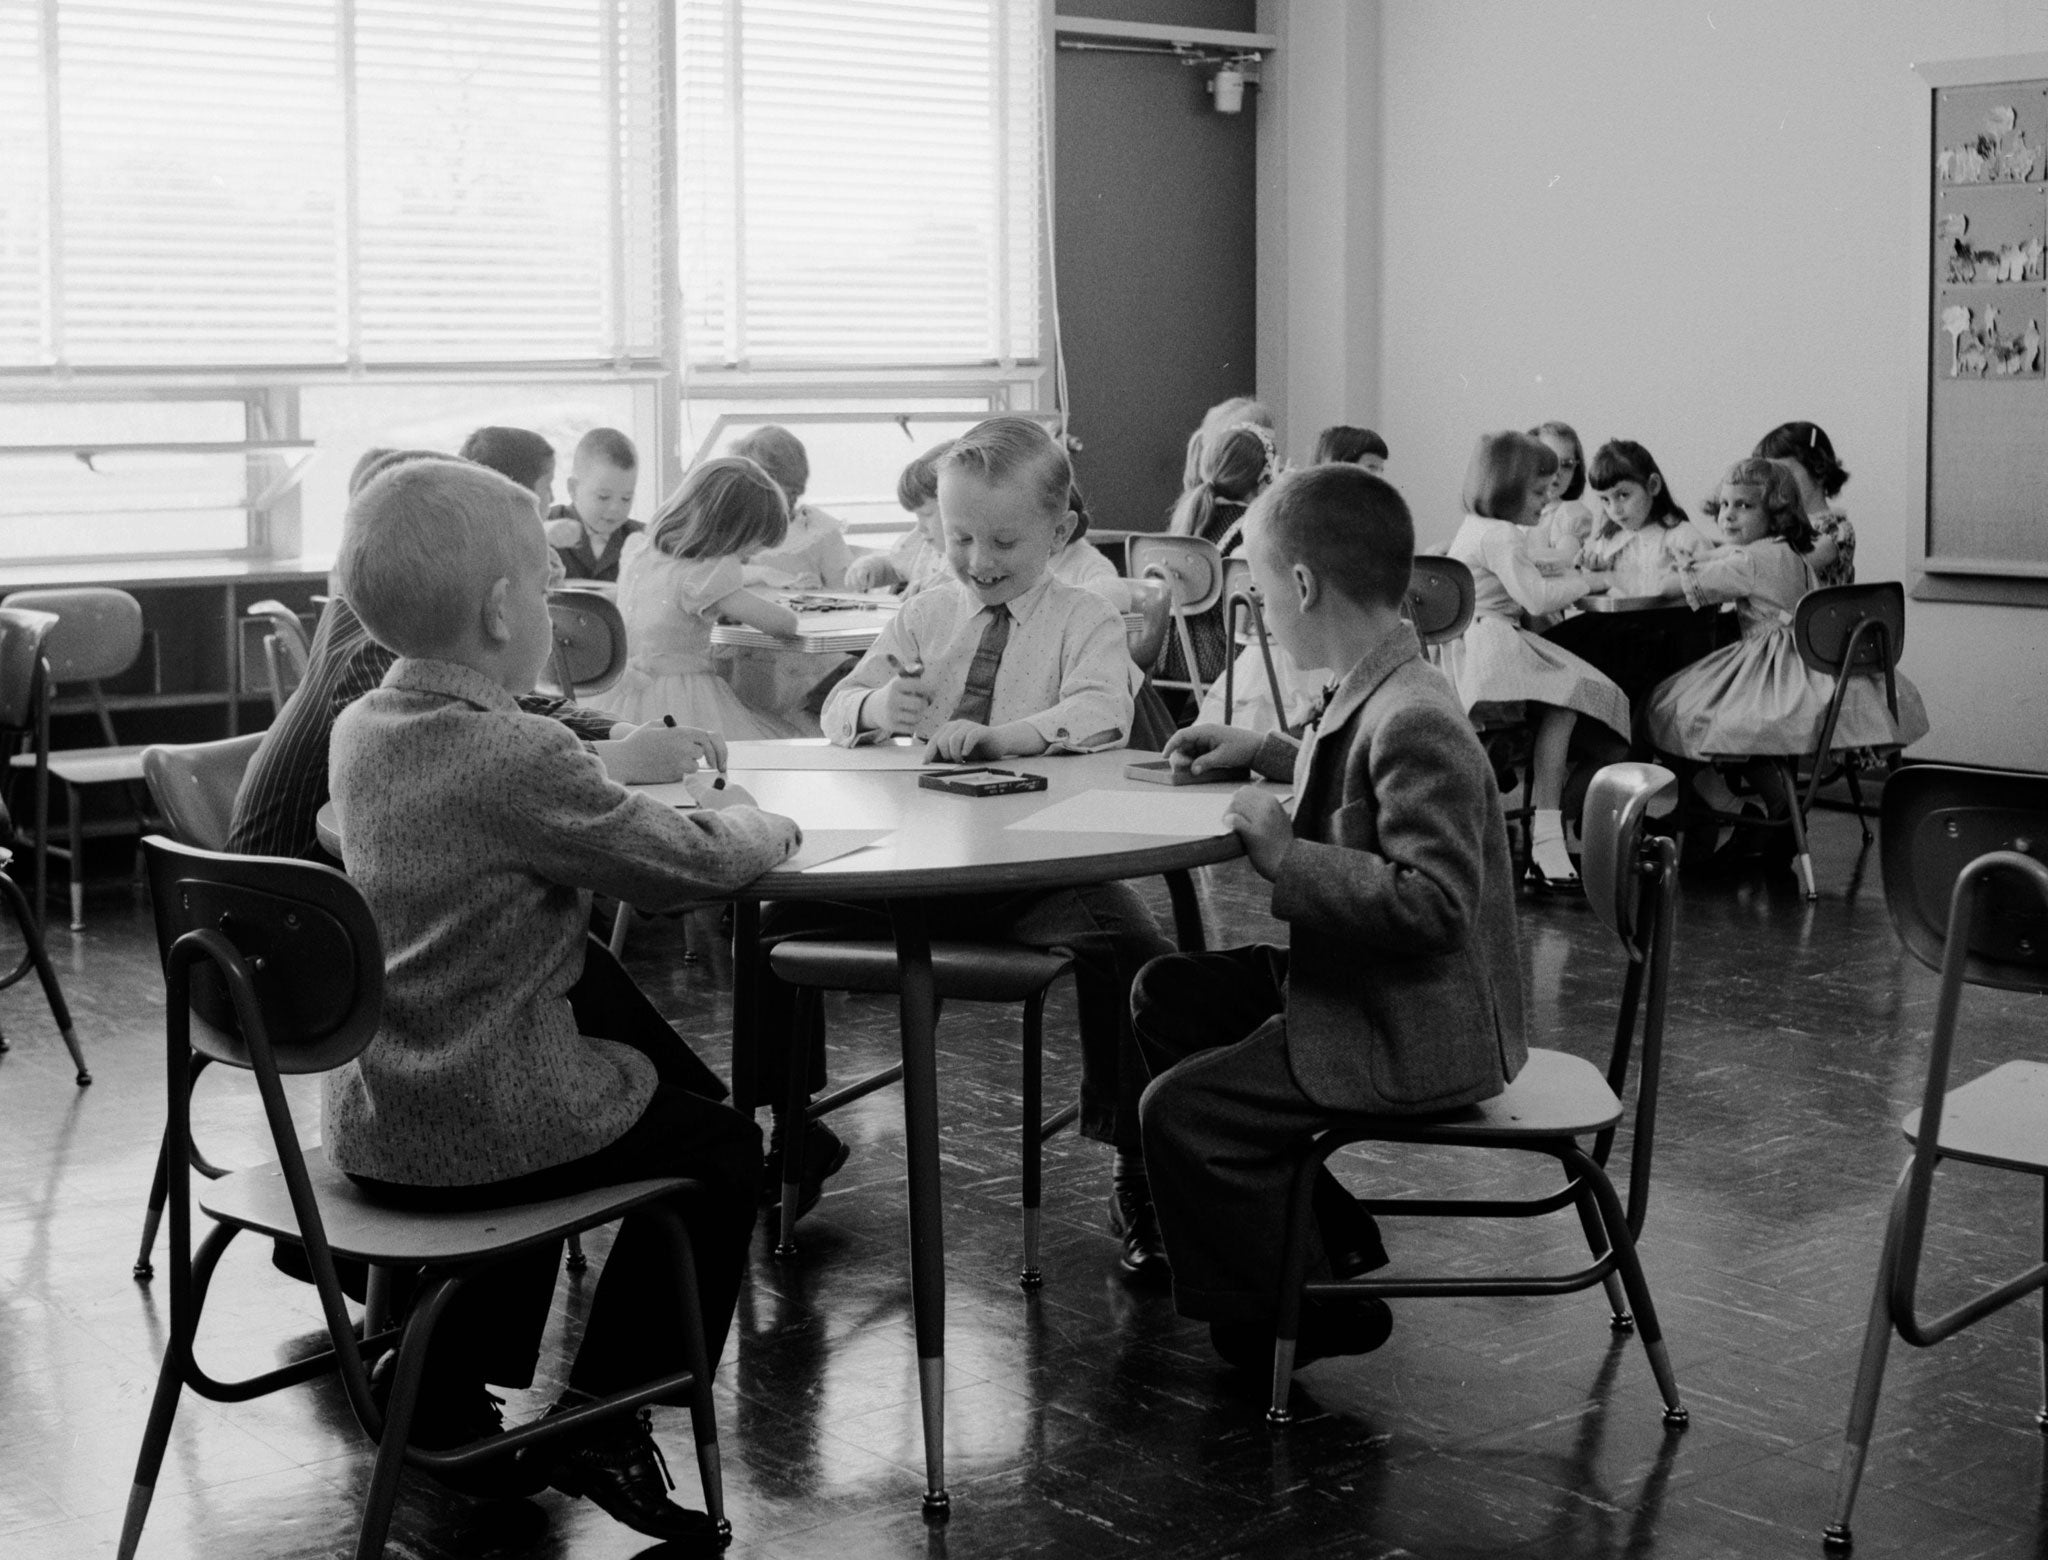 Circa 1956: A group of young children in a schoolroom.